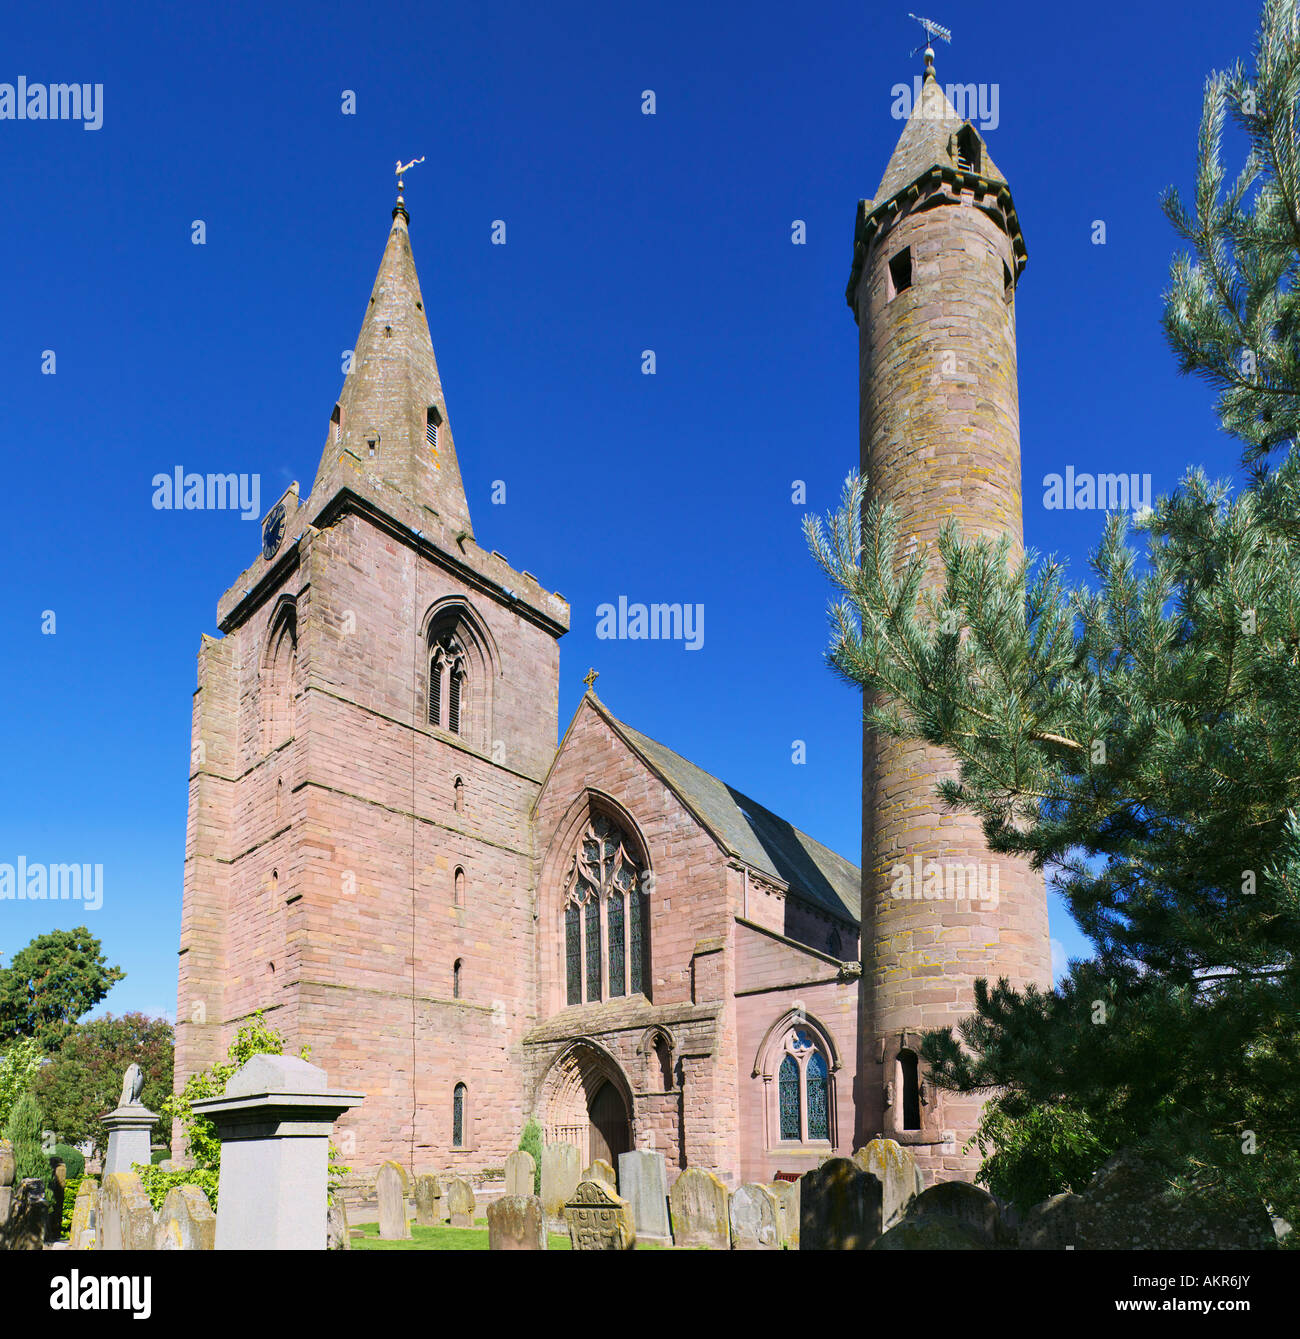 Brechin Cathedral et Tour Ronde, Brechin, Angus, Scotland, UK Banque D'Images